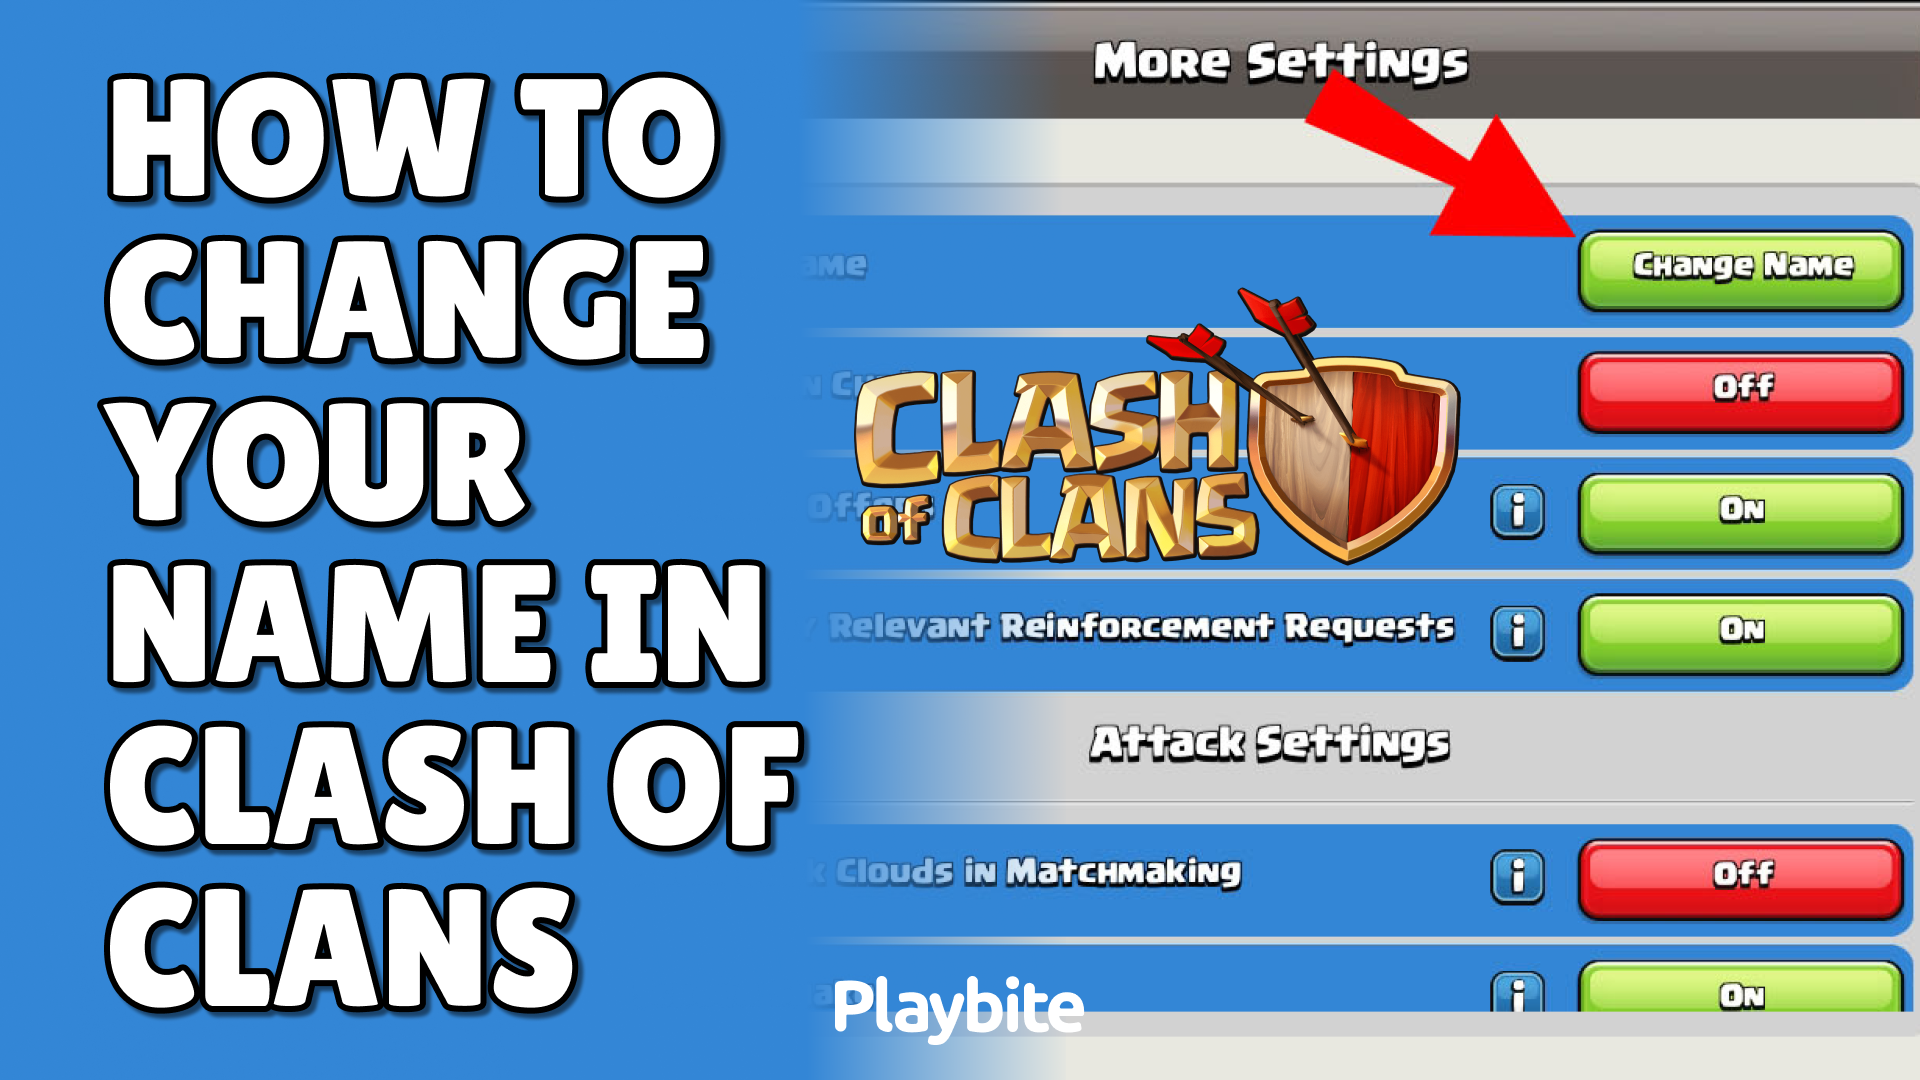 How To Change Name In Clash Of Clans